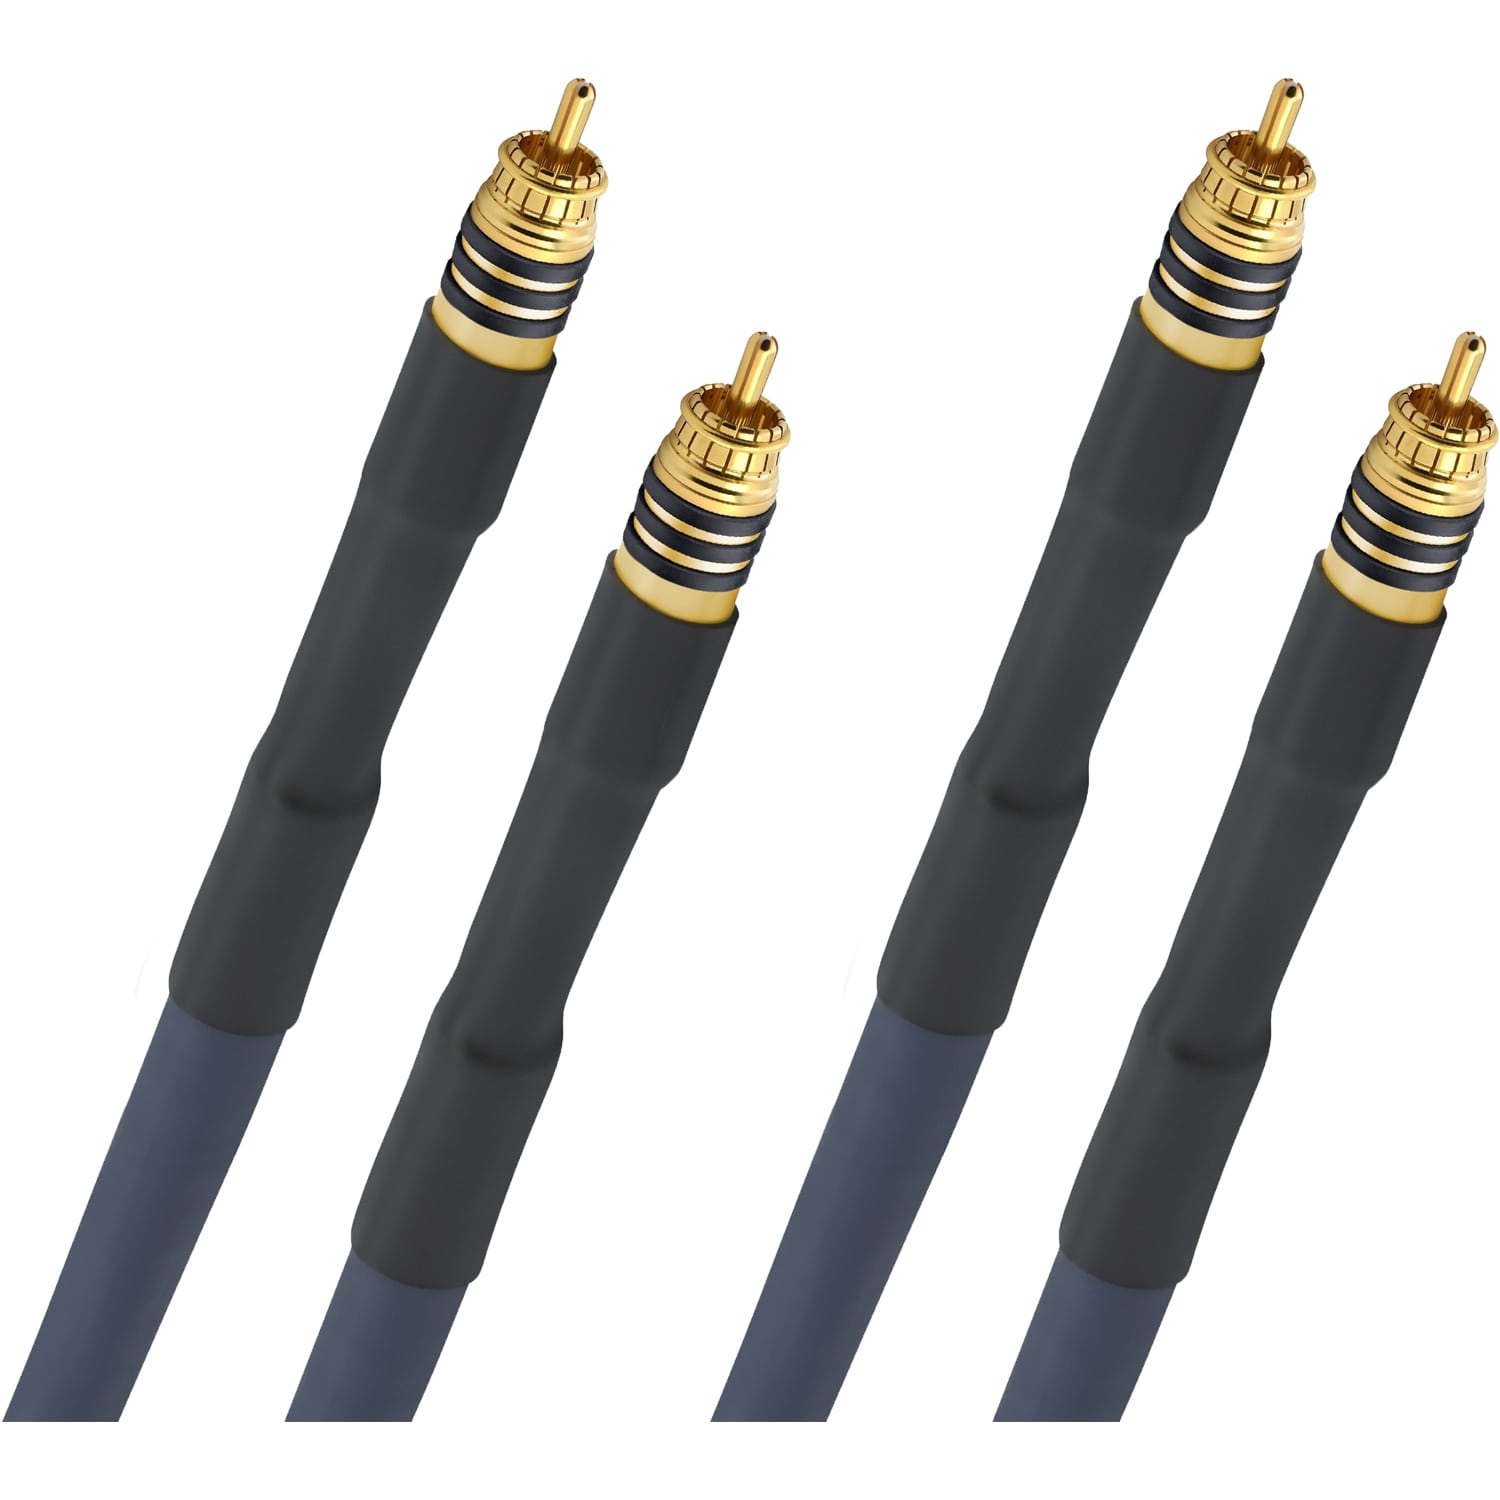 Кабели межблочные аудио Oehlbach STATE OF THE ART XXL Cable RCA, 2x1,50m, gold, D1C13114 кабели межблочные аудио oehlbach state of the art xxl cable xlr 2x2 0m gold d1c13136